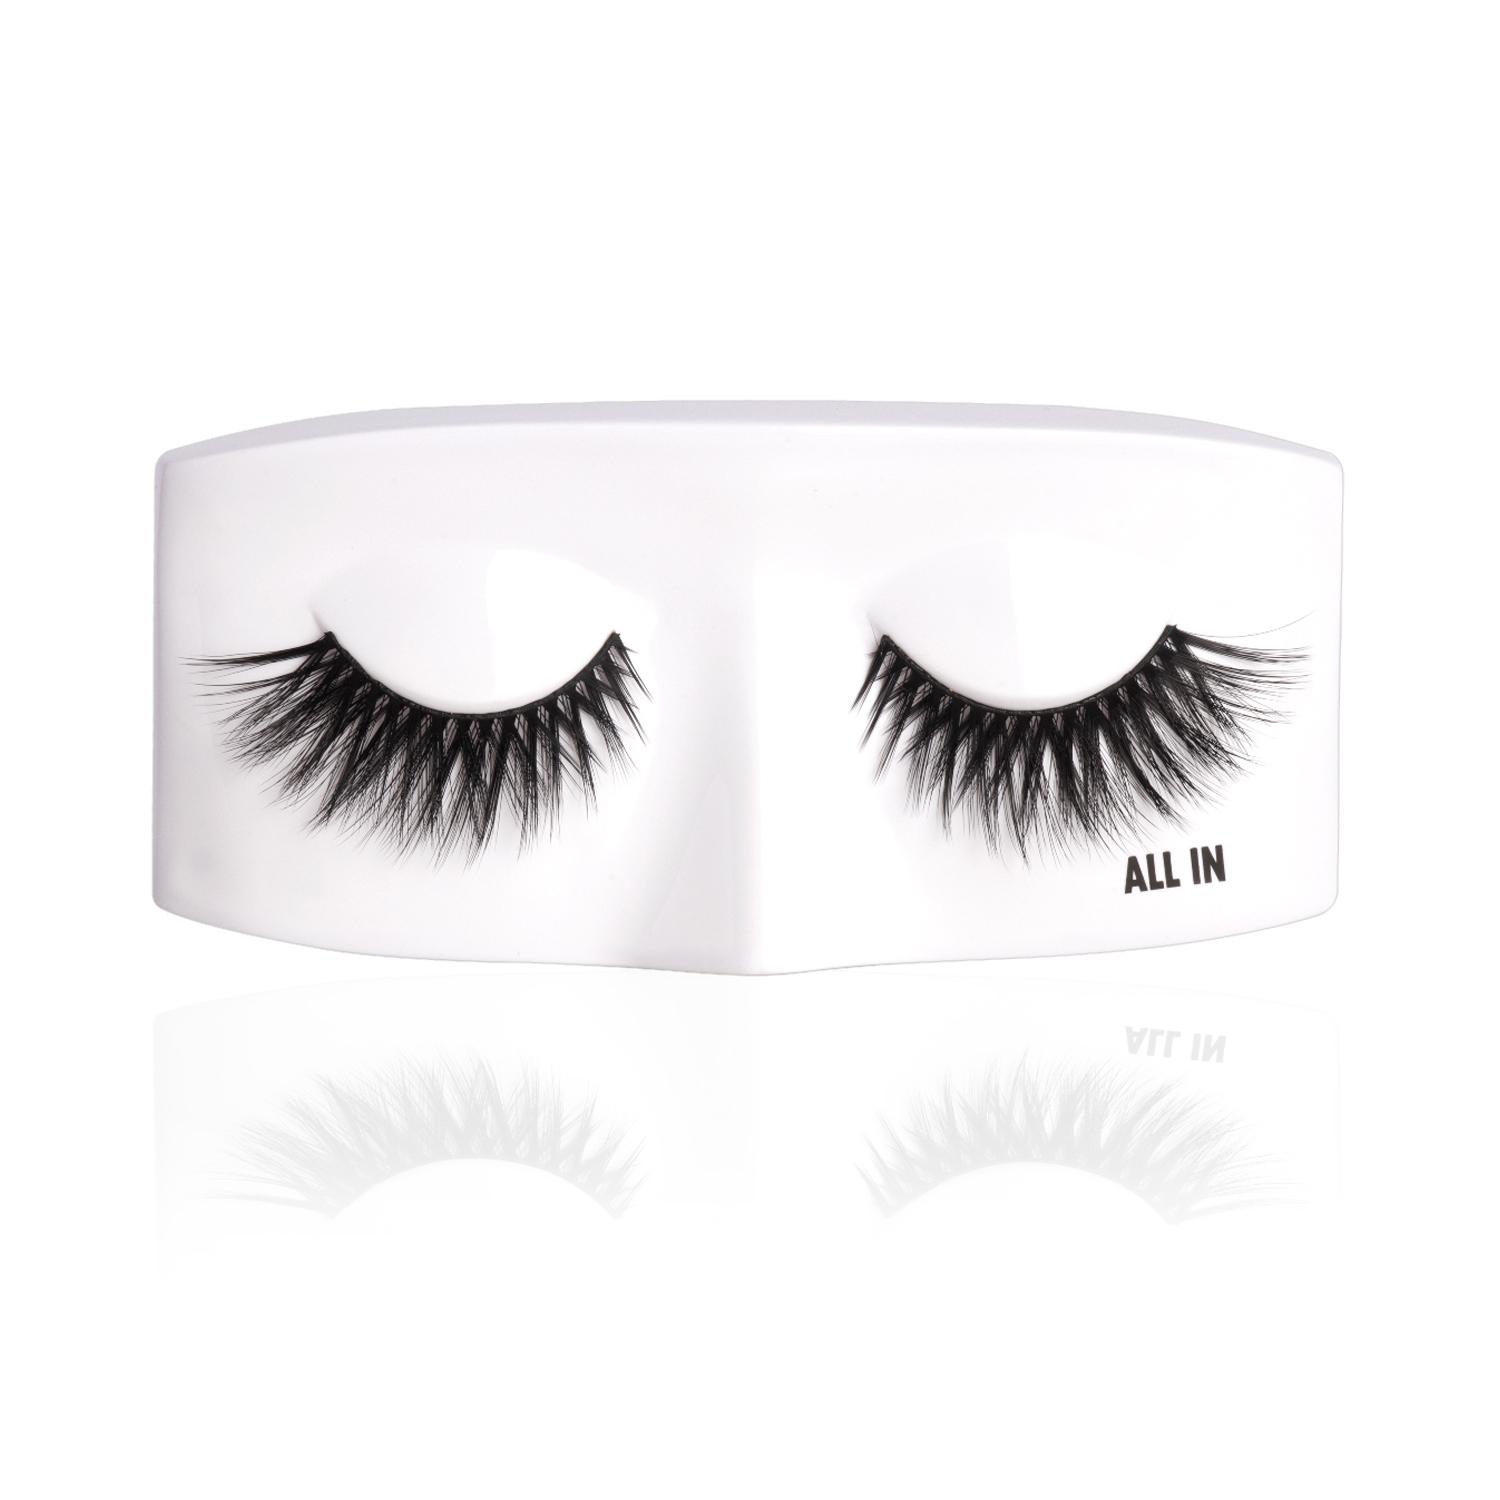 PAC | PAC Ace Of Lashes - All In (1 Pair)